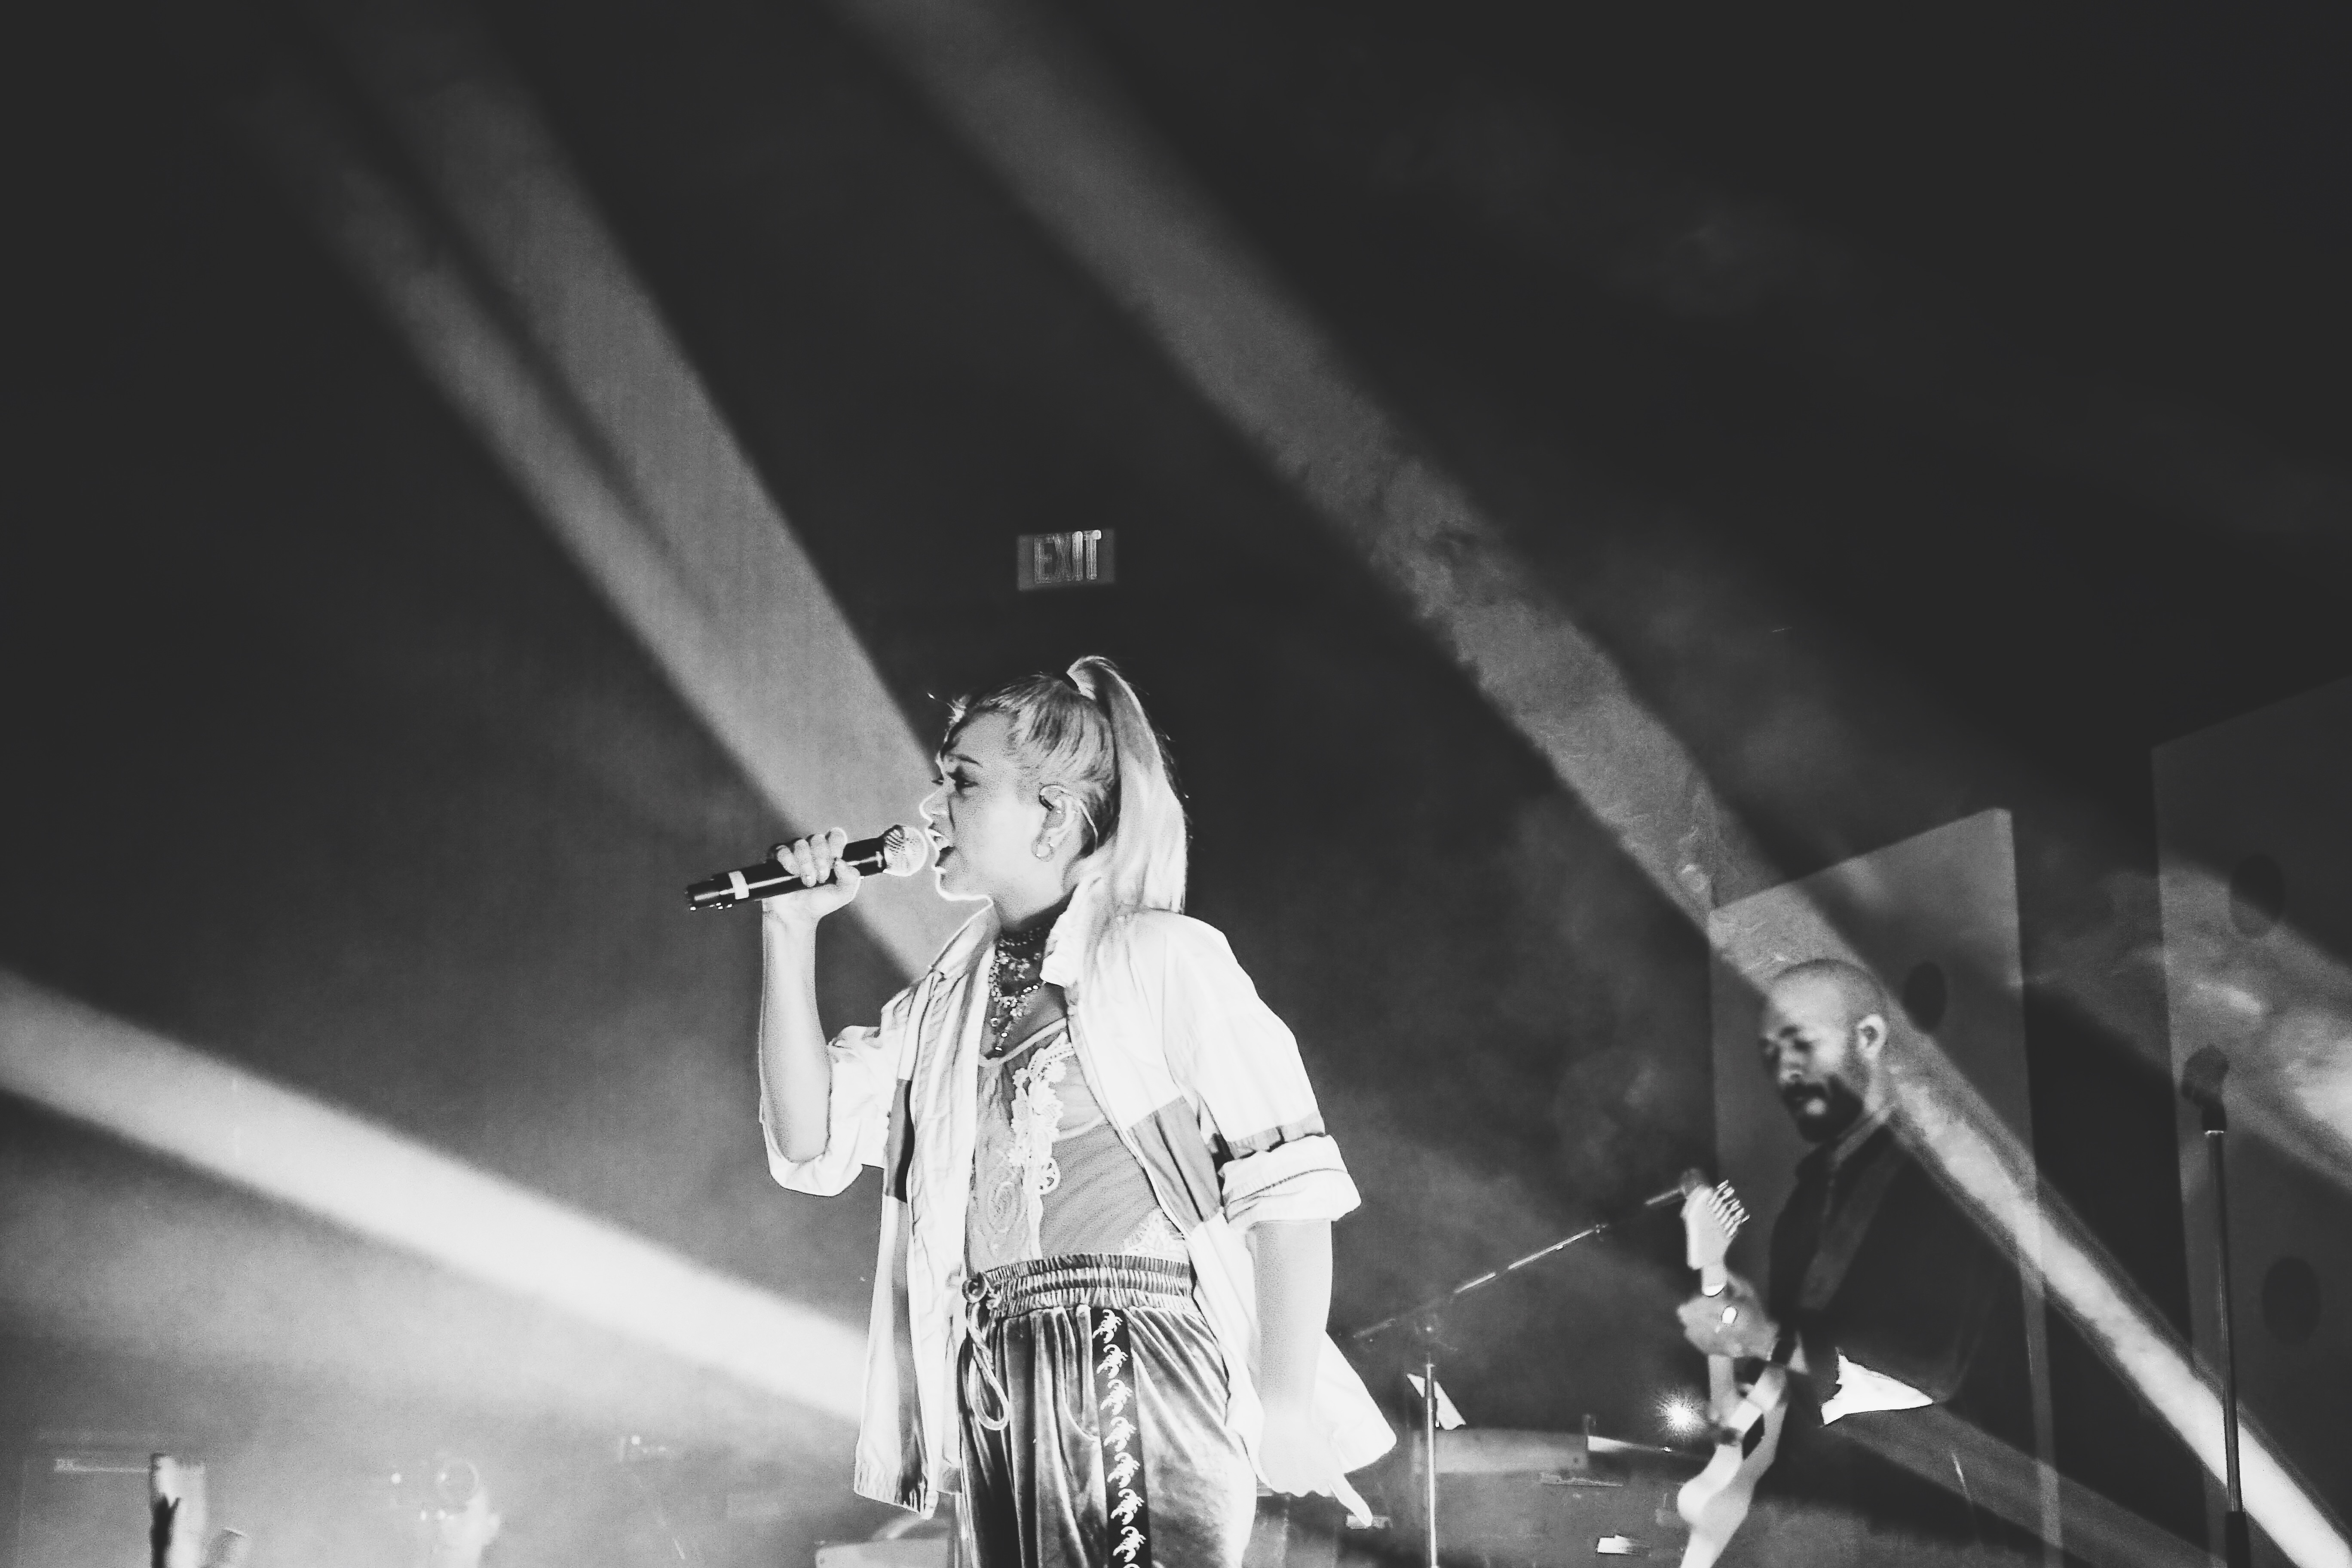 Musician Hayley Kiyoko in black and white, singing on a stage with lights behind her. The stage is filled with smoke from dry ice. An EXIT sign looms above her head in the distance. Her bass player leans into their instrument behind her.